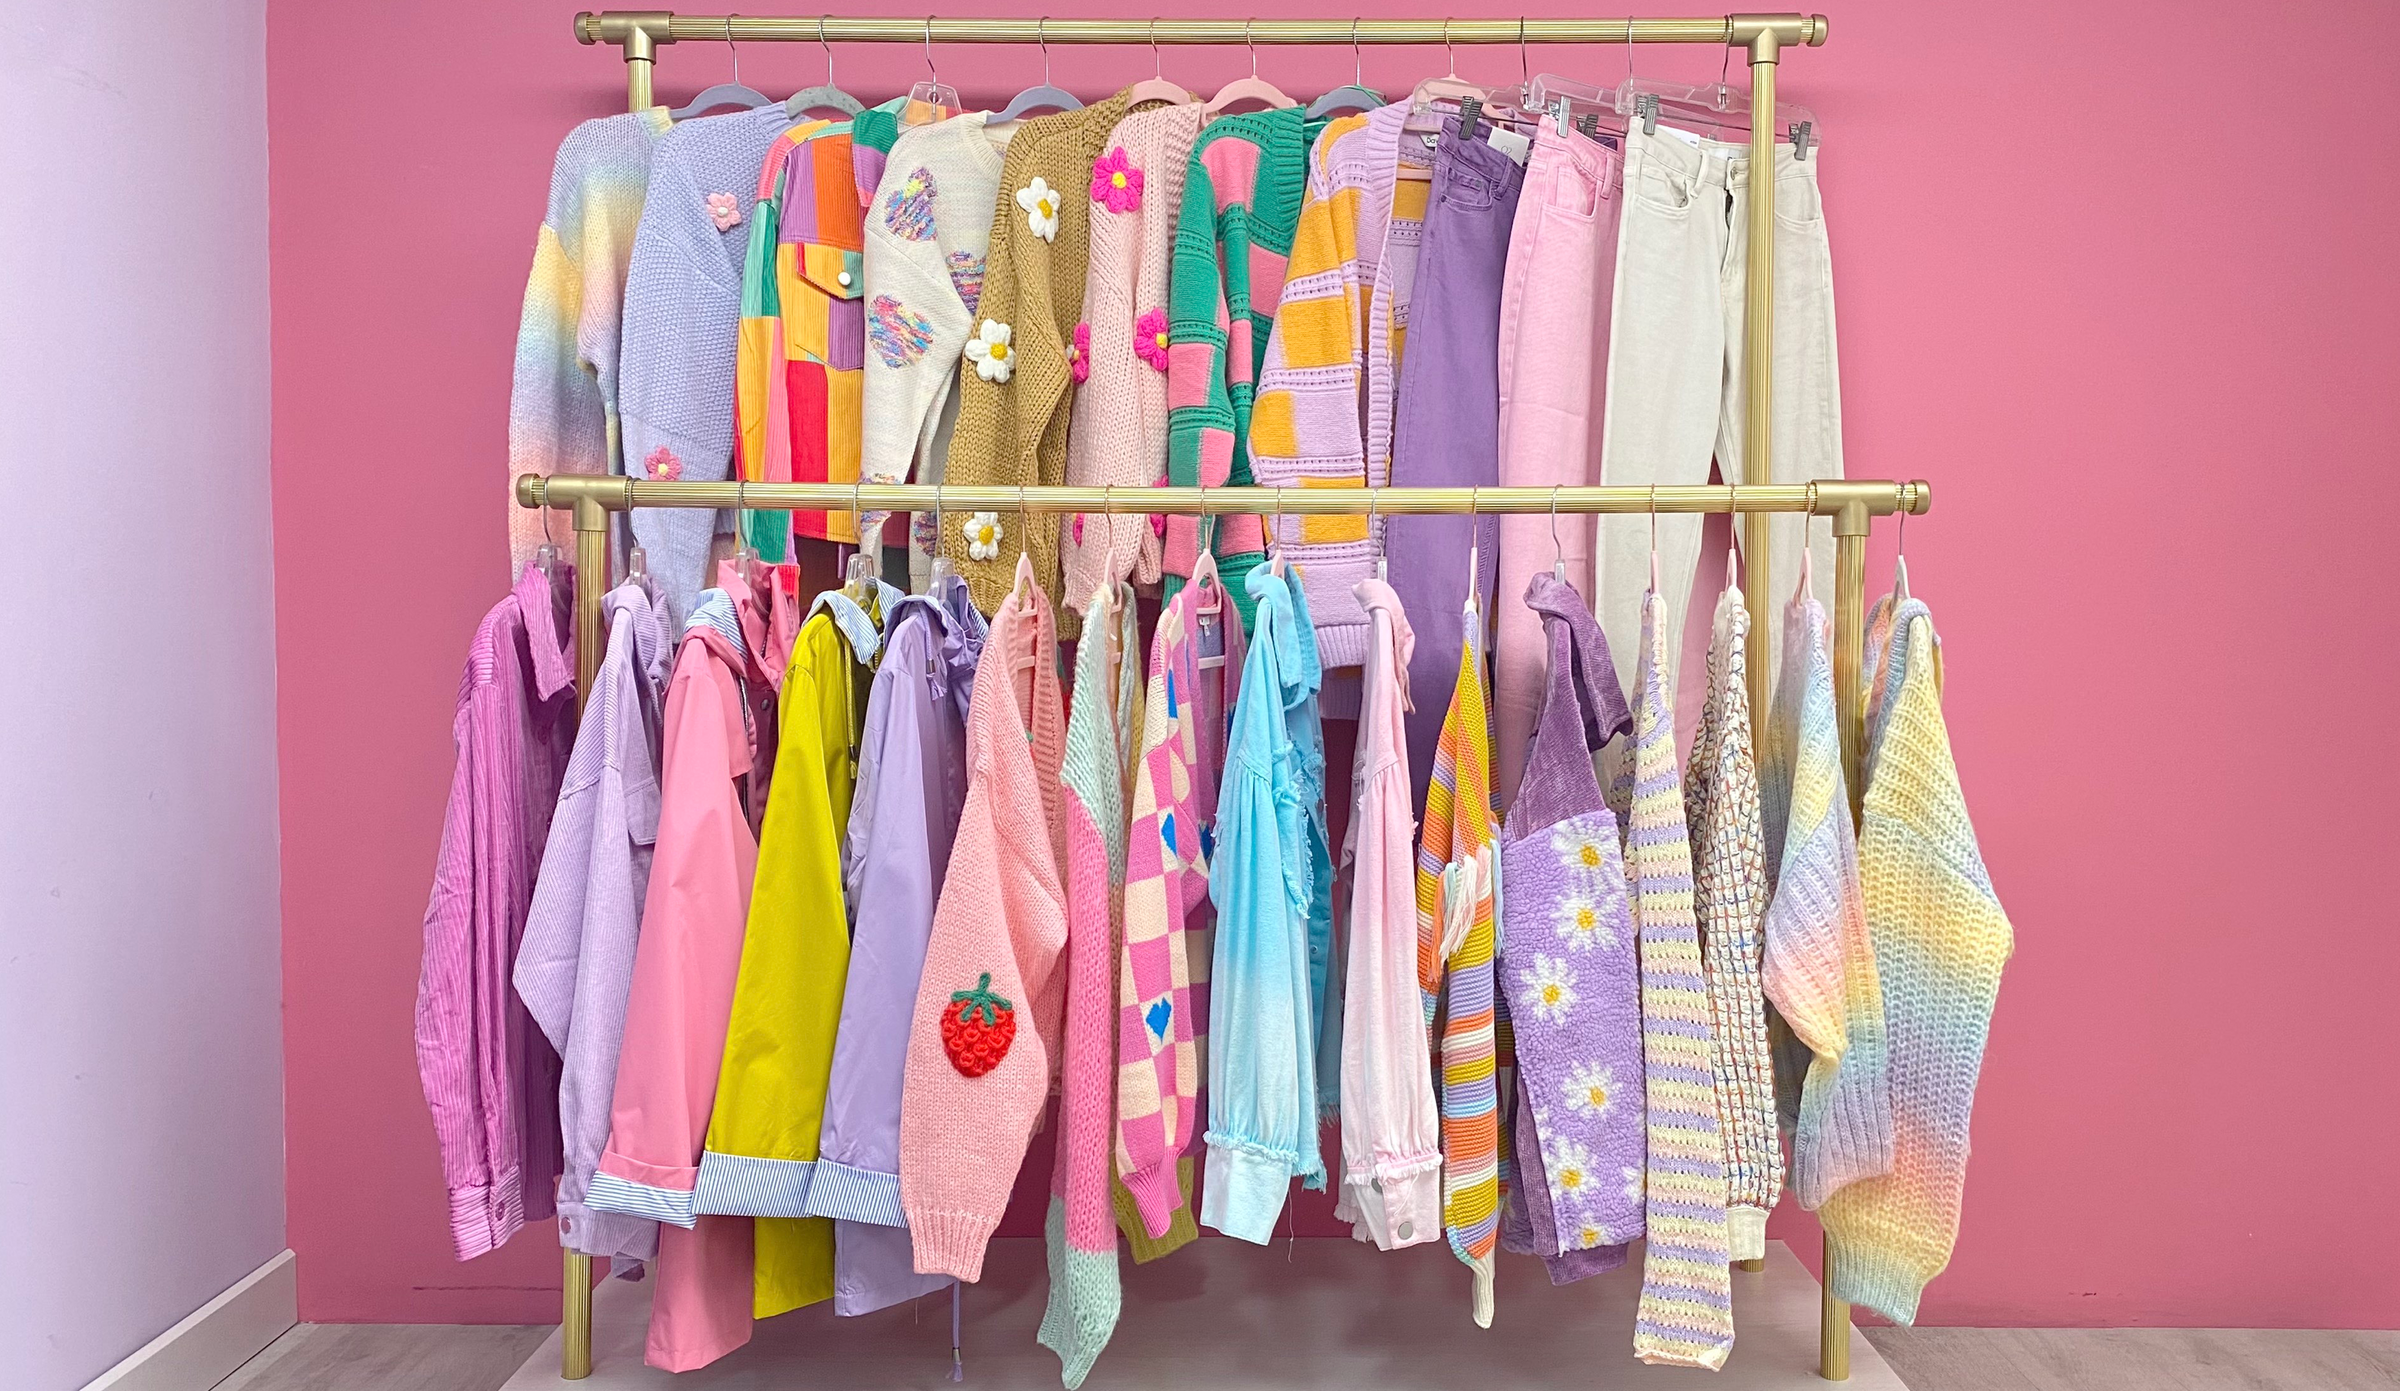 The Cute Sweater Collection #6